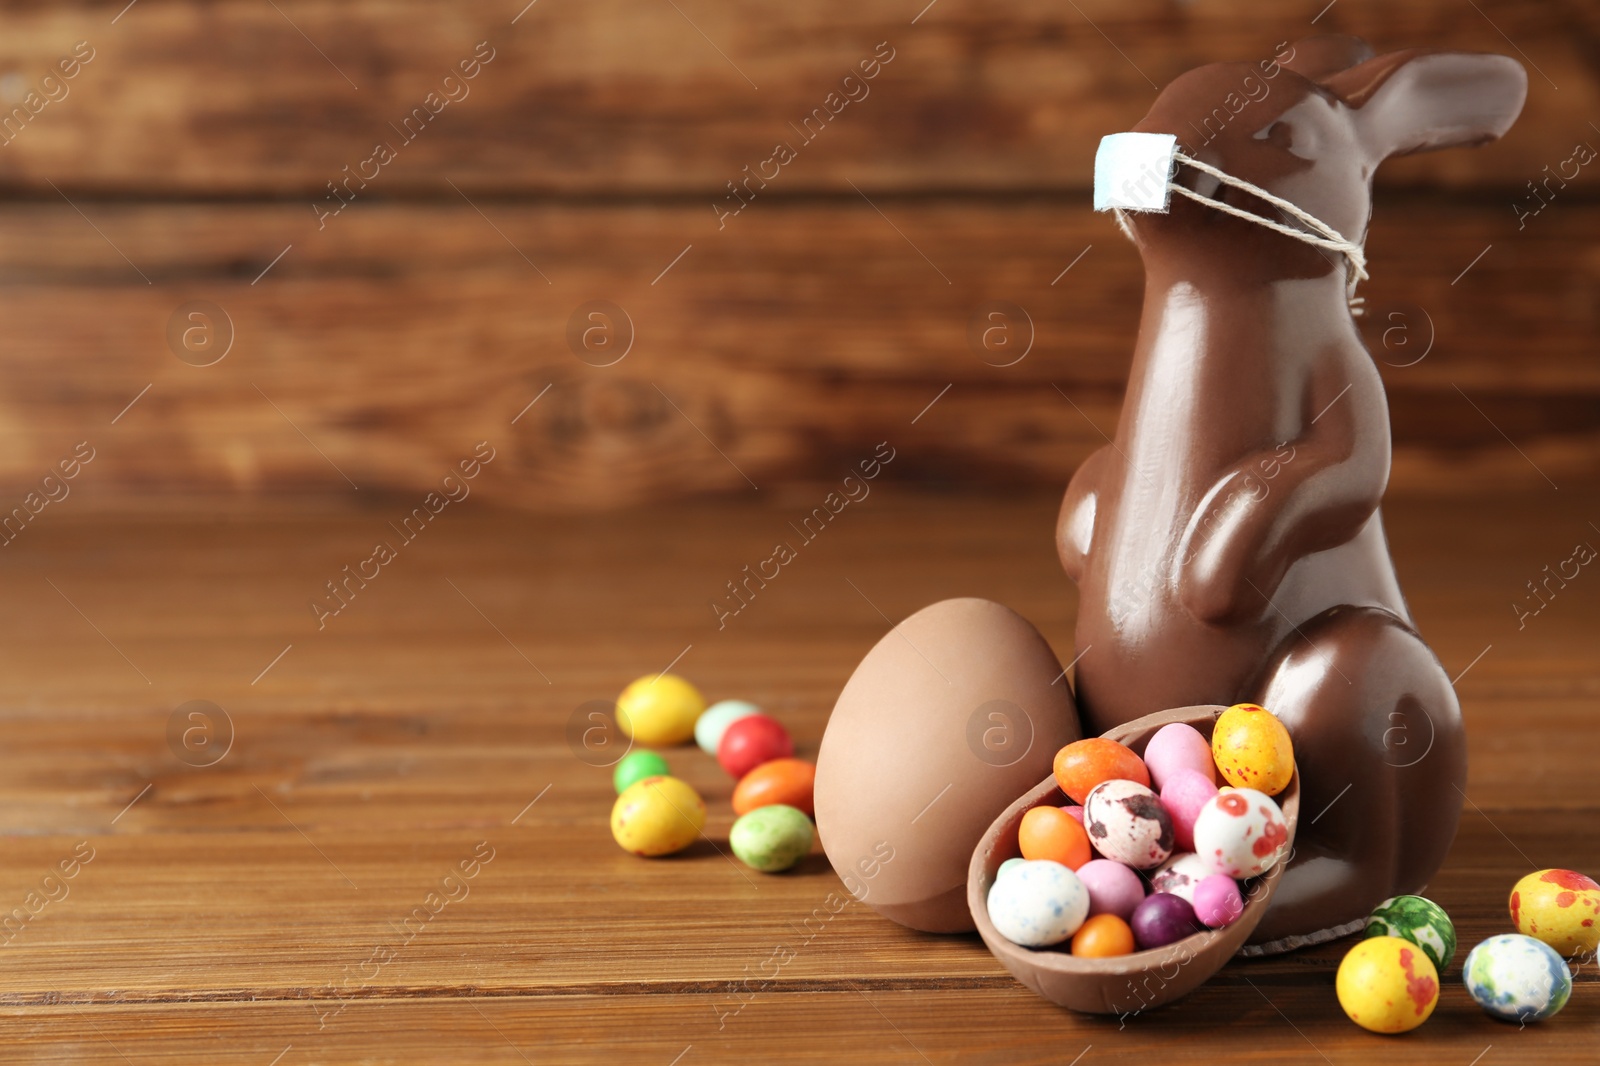 Photo of Chocolate bunny with protective mask, egg shaped candies and space for text on wooden table. Easter holiday during COVID-19 quarantine